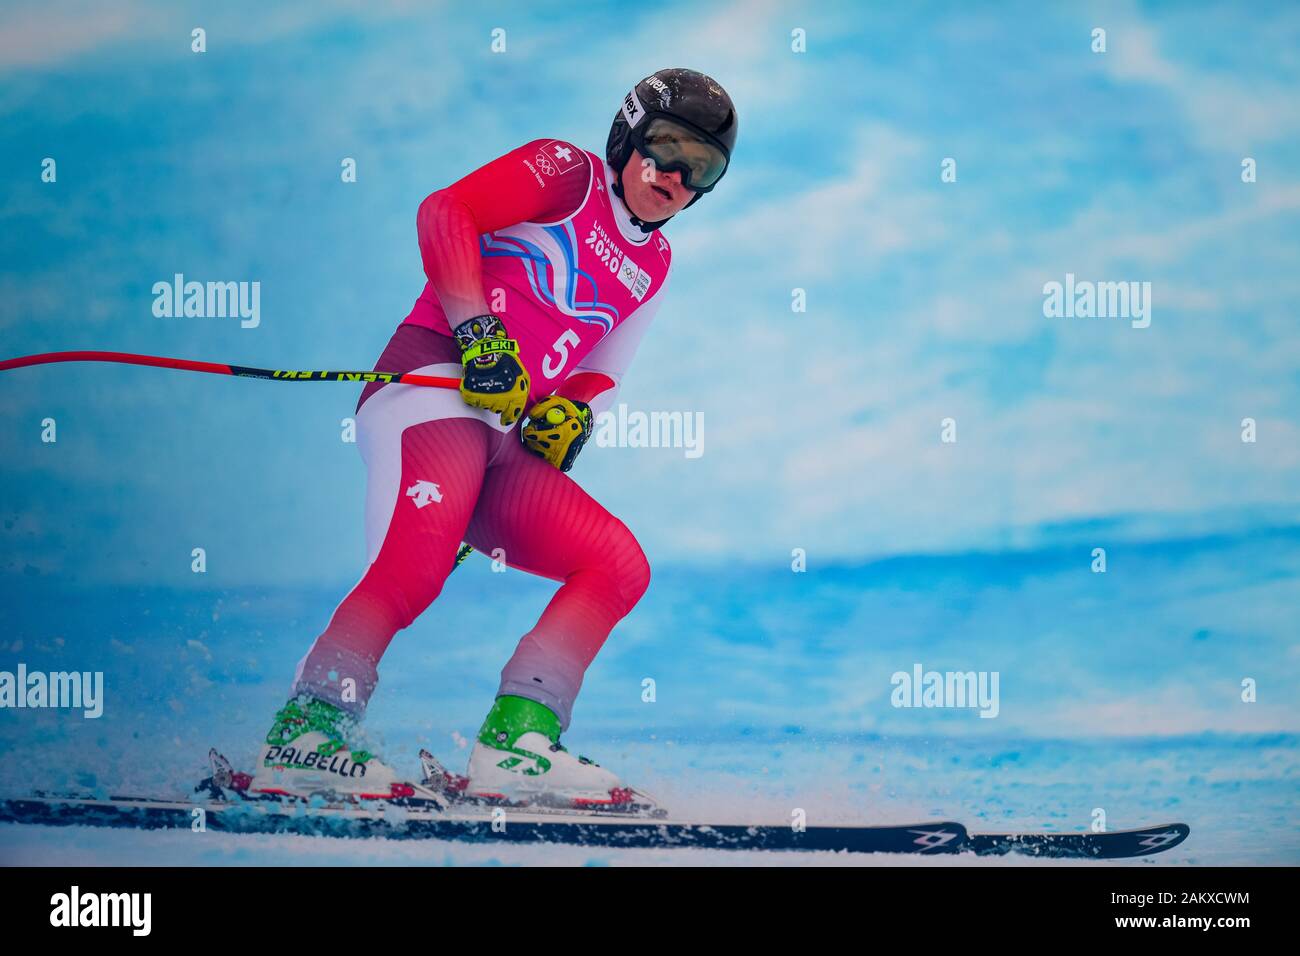 LAUSANNE, SWITZERLAND. 10th, Jan 2020. GINI Silvano (SUI) competes in Alpine Ski Mens Super G during the Lausanne 2020 Youth Olympic Games at Les Diablerets Alpine Centre on Friday, 10 January 2020. LAUSANNE, SWITZERLAND. Credit: Taka G Wu/Alamy Live News Stock Photo